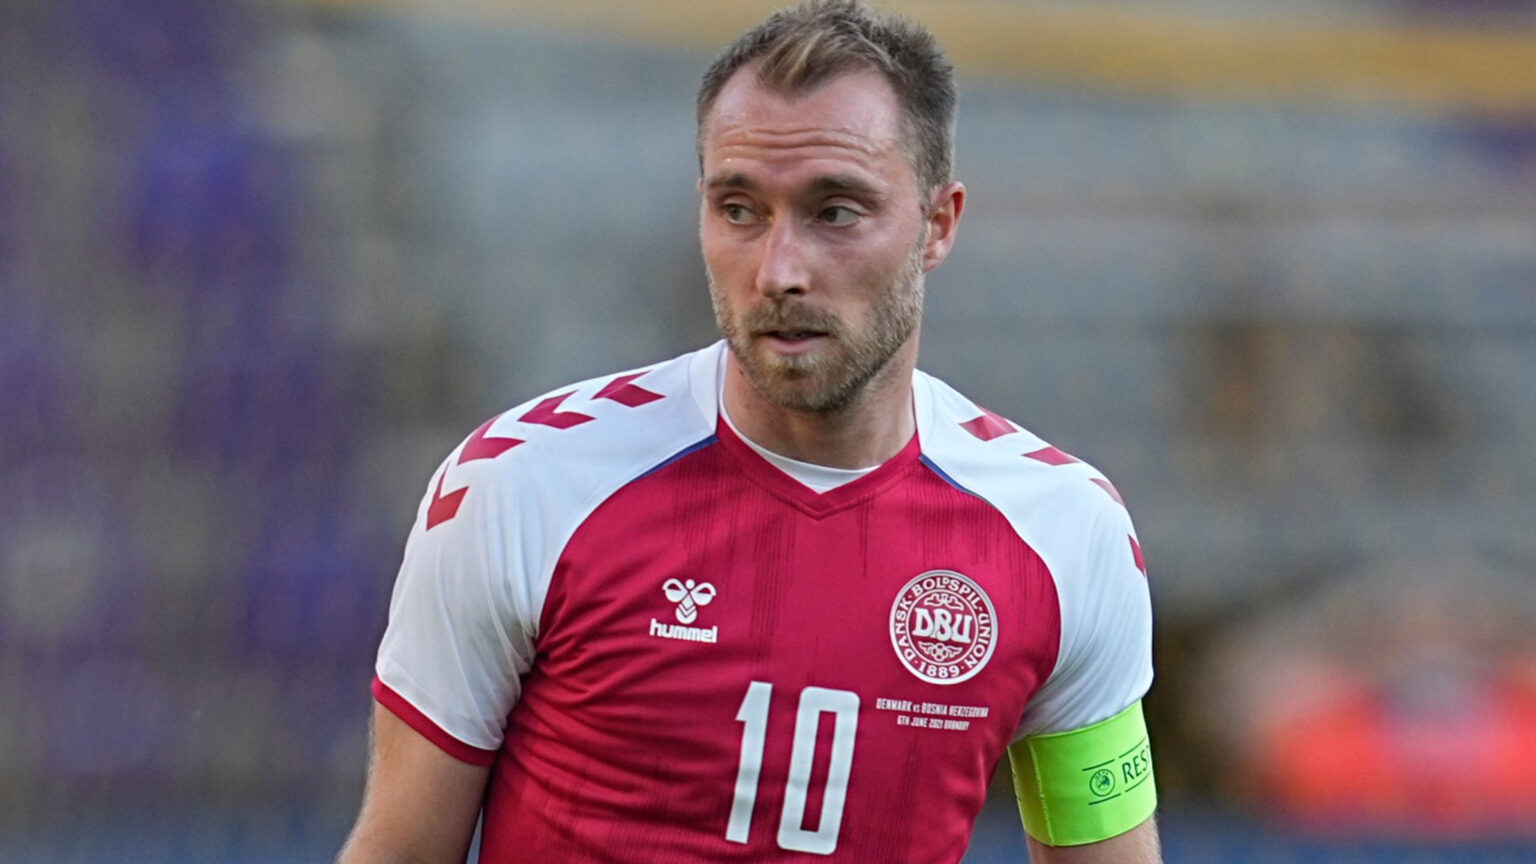 After footballer Christian Eriksen collapsed on the field last week, fans were overjoyed he made a speedy recovery. See what's being done here.